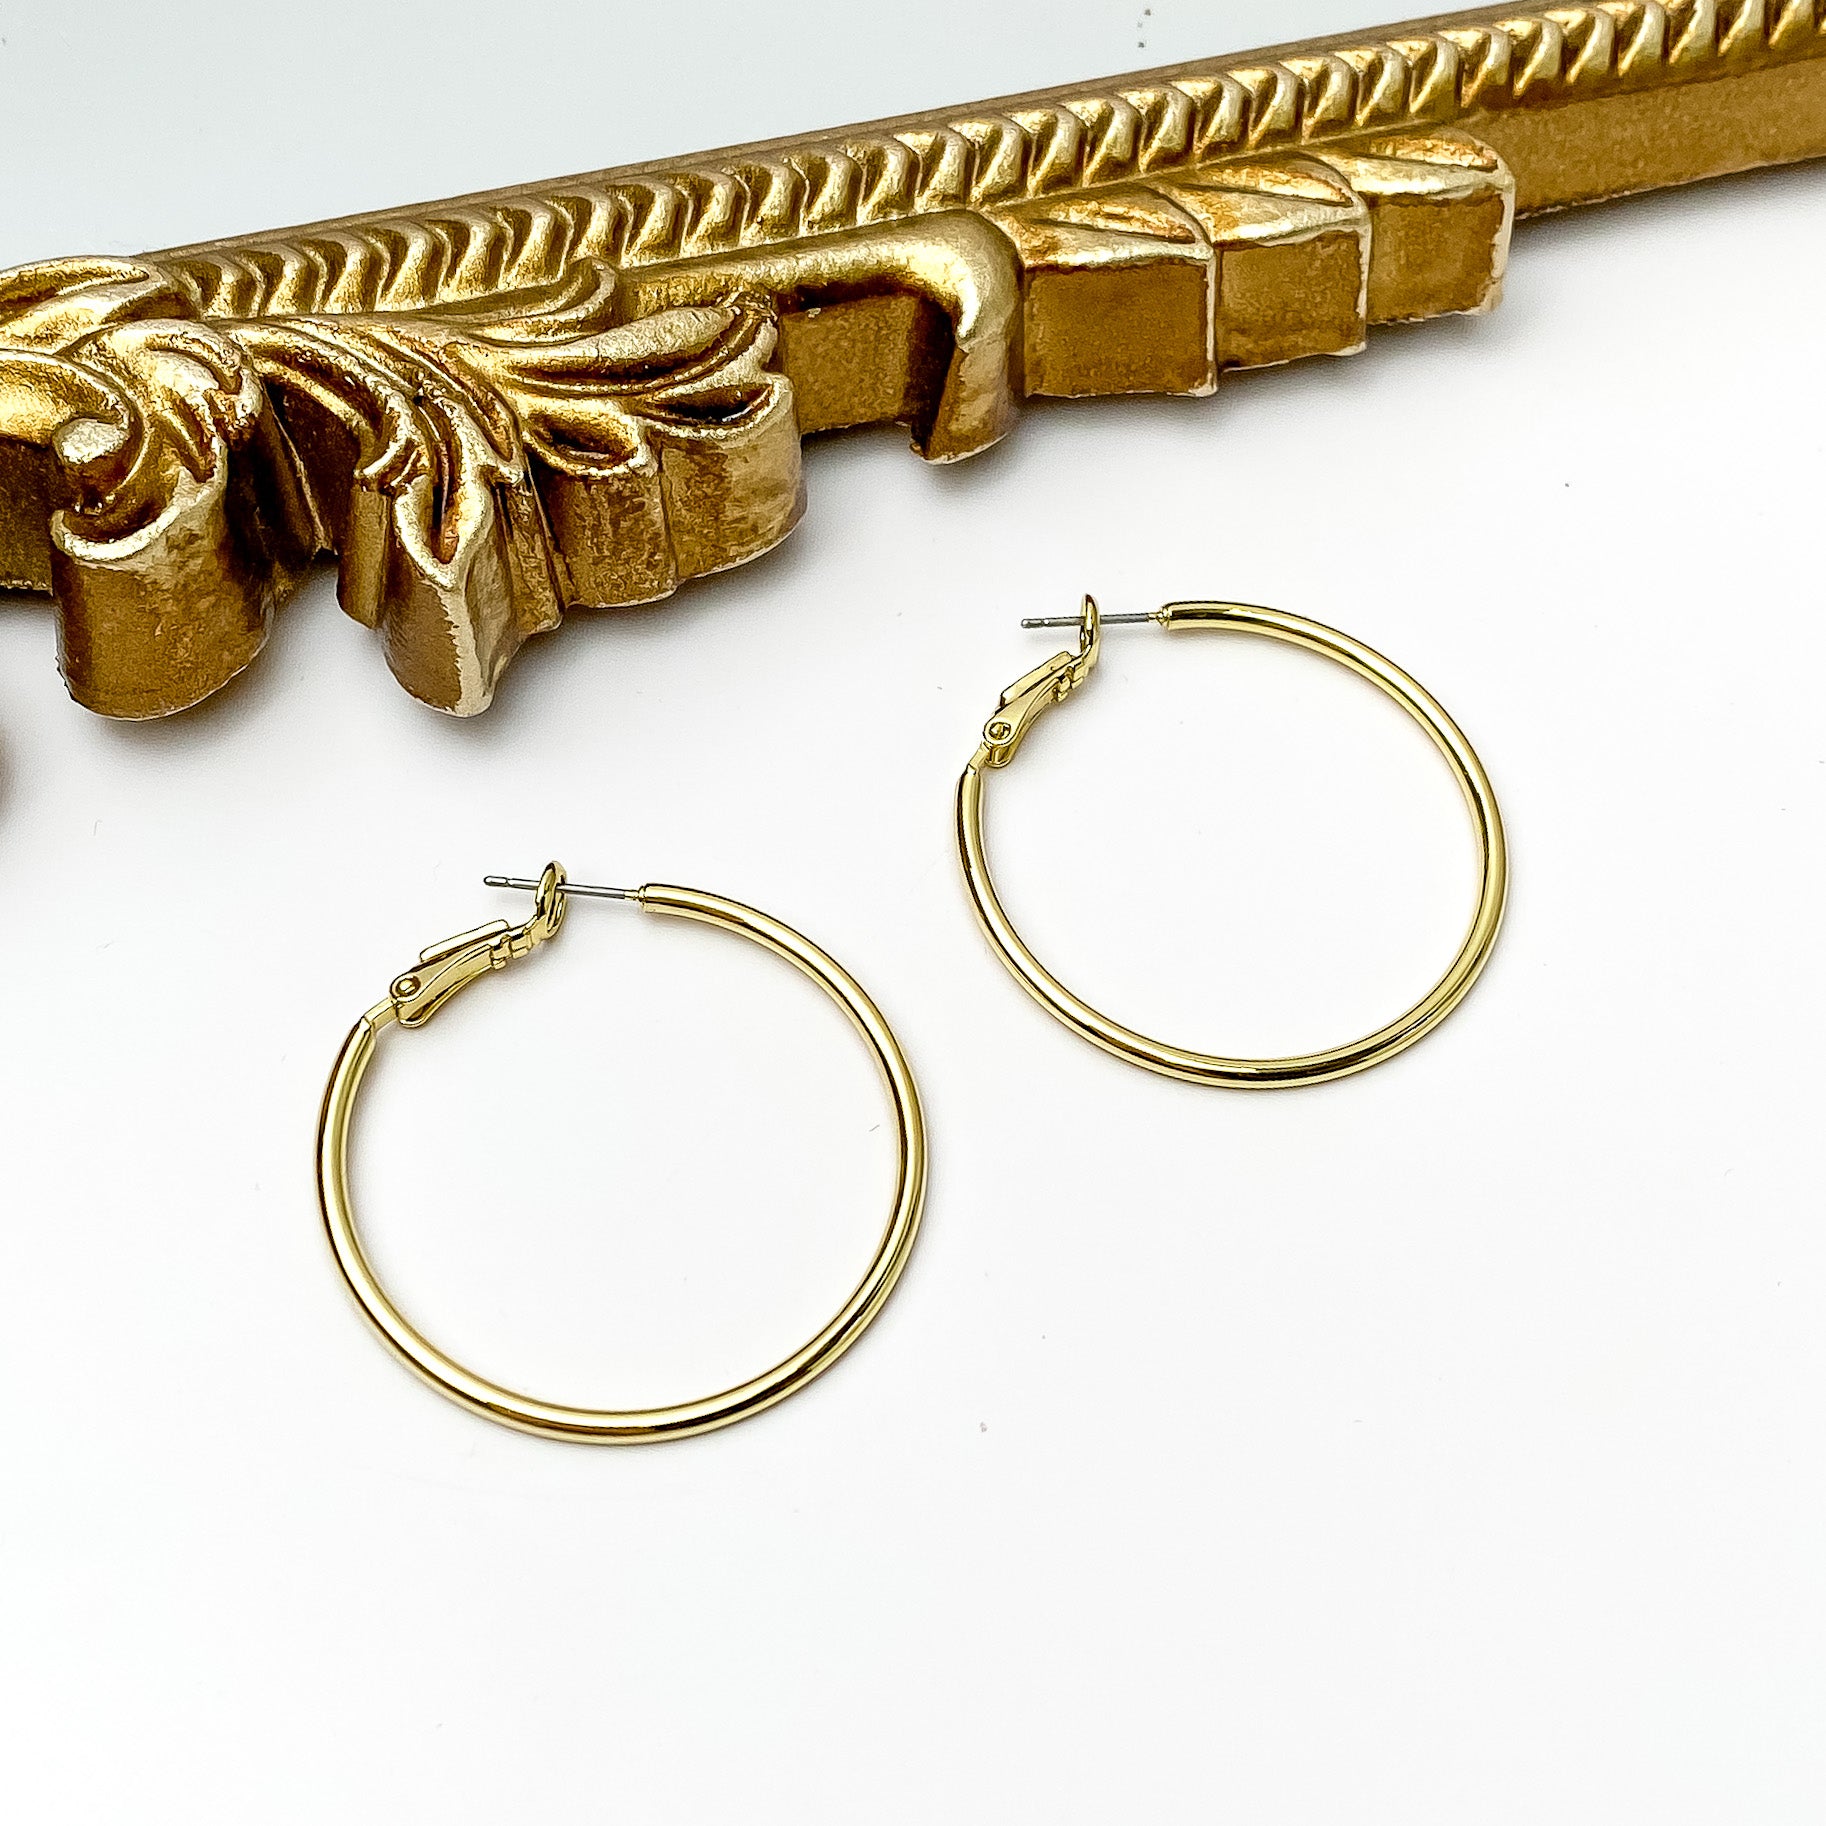 Pictured are a pair of gold hoop earrings. These earrings are pictured in front of a gold mirror on a white background. 